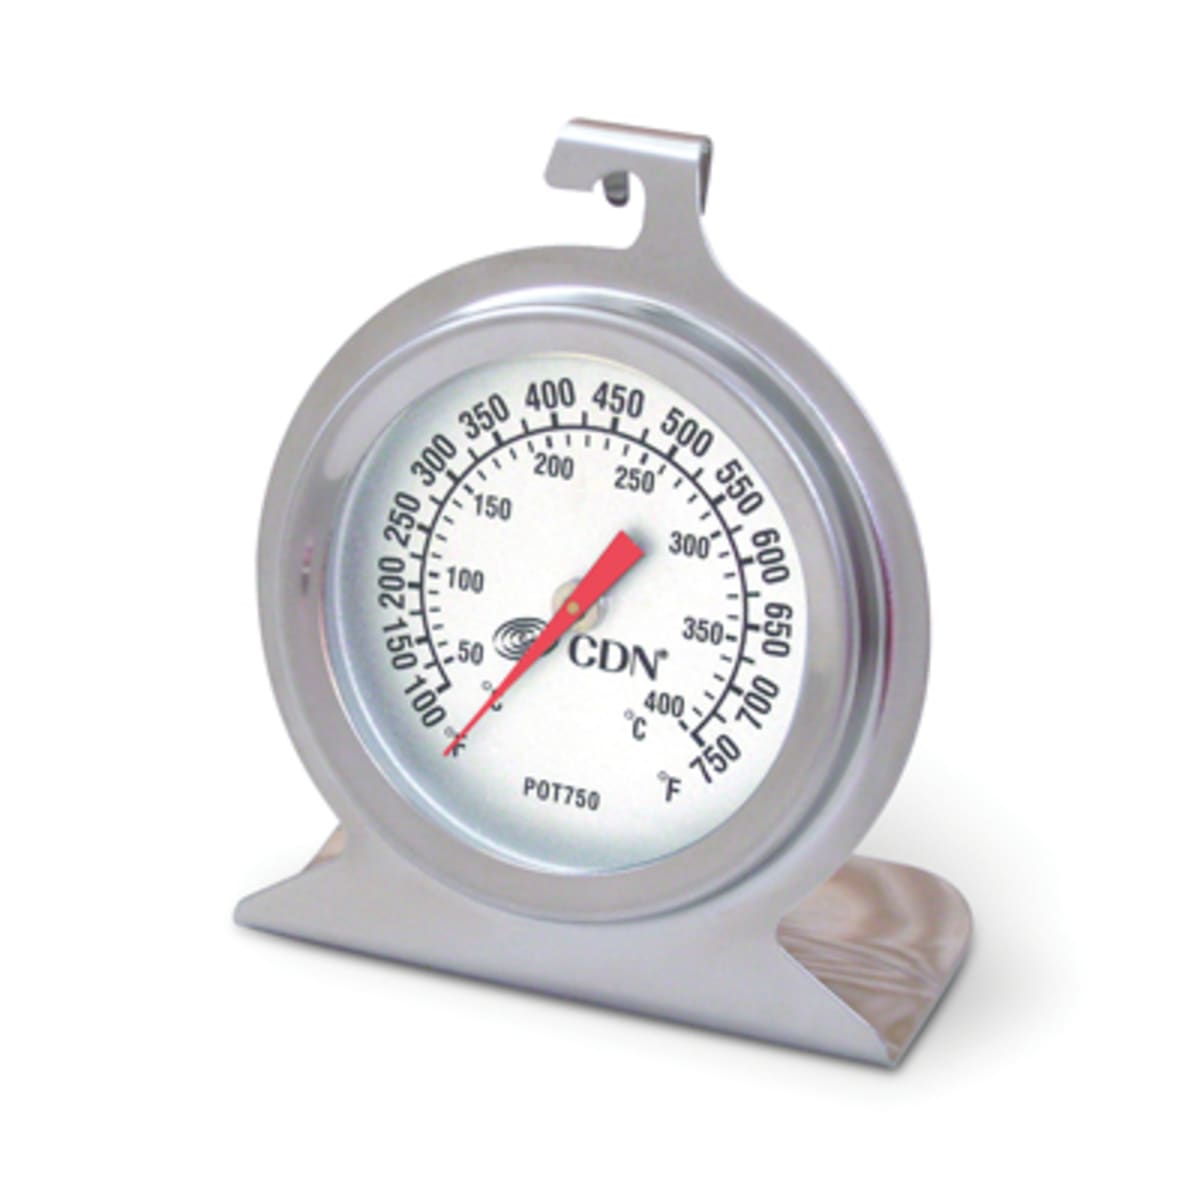 Choosing an Oven Thermometer - Comark Instruments